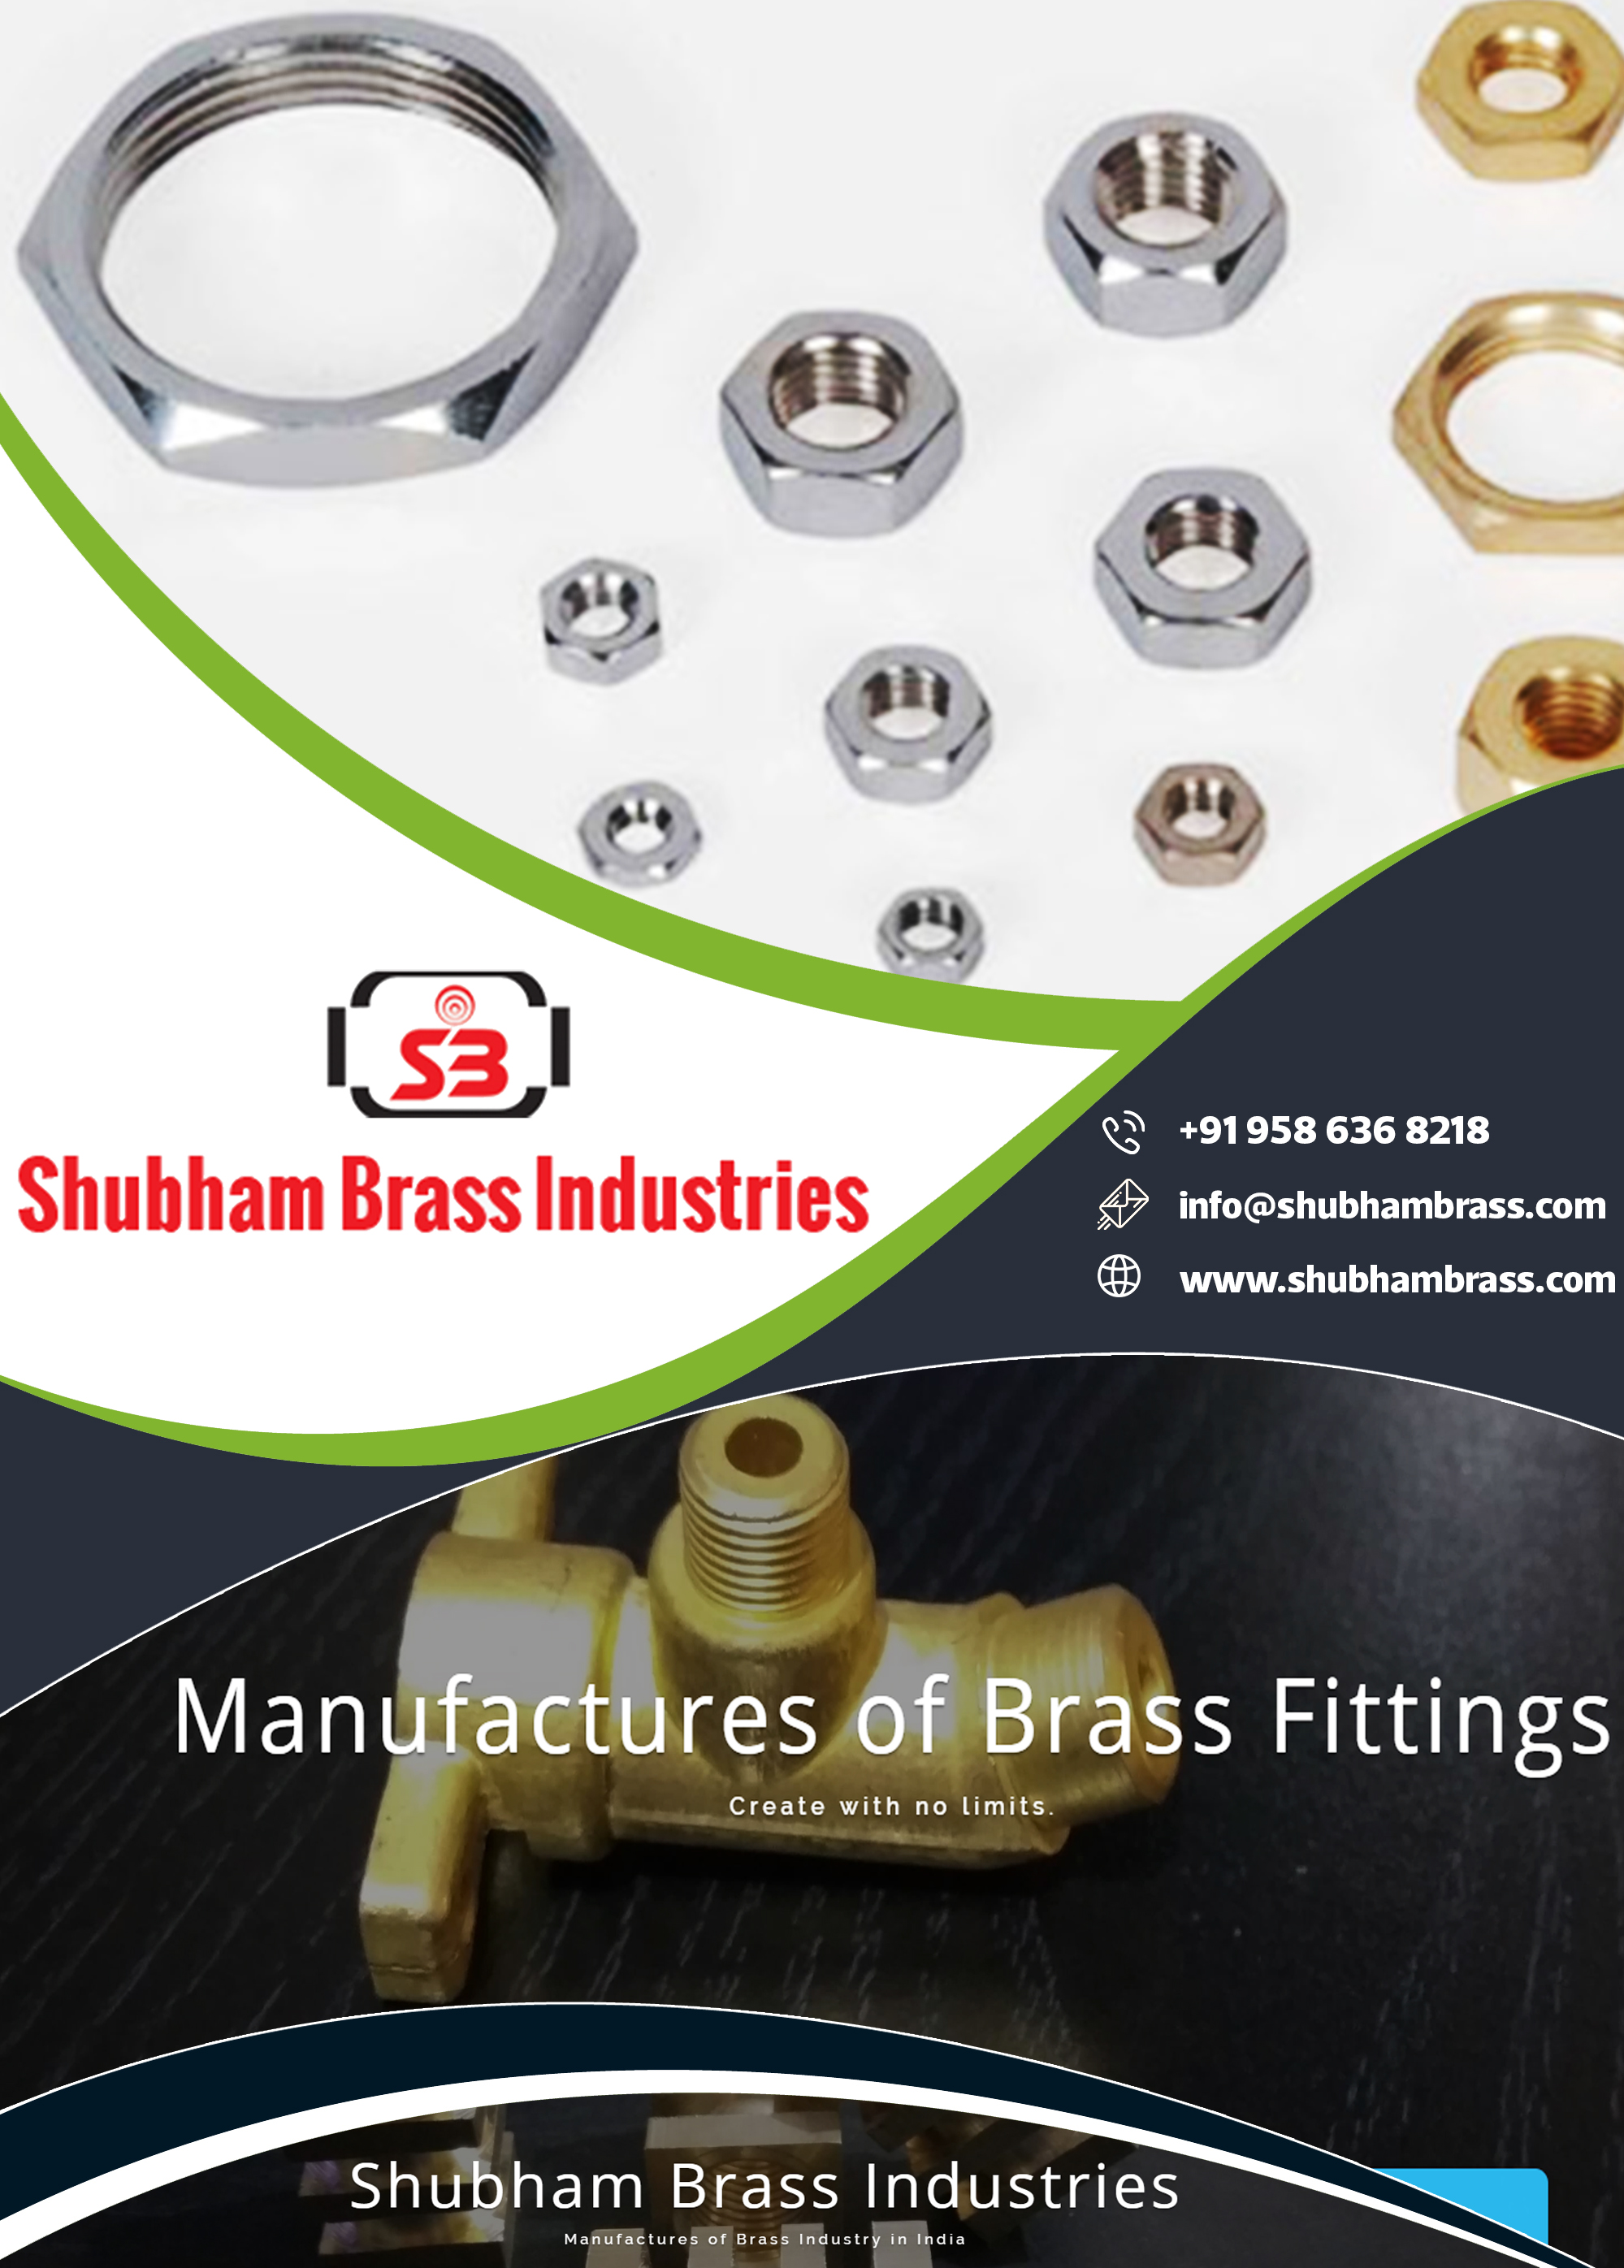 Shubham Brass Fittings, shubham brass industries, brass products, shubham brass, manufacturer in jamnagar, Brass Parts manufacturer in Jamnagar, Shubham Brass Brass products manufacturer